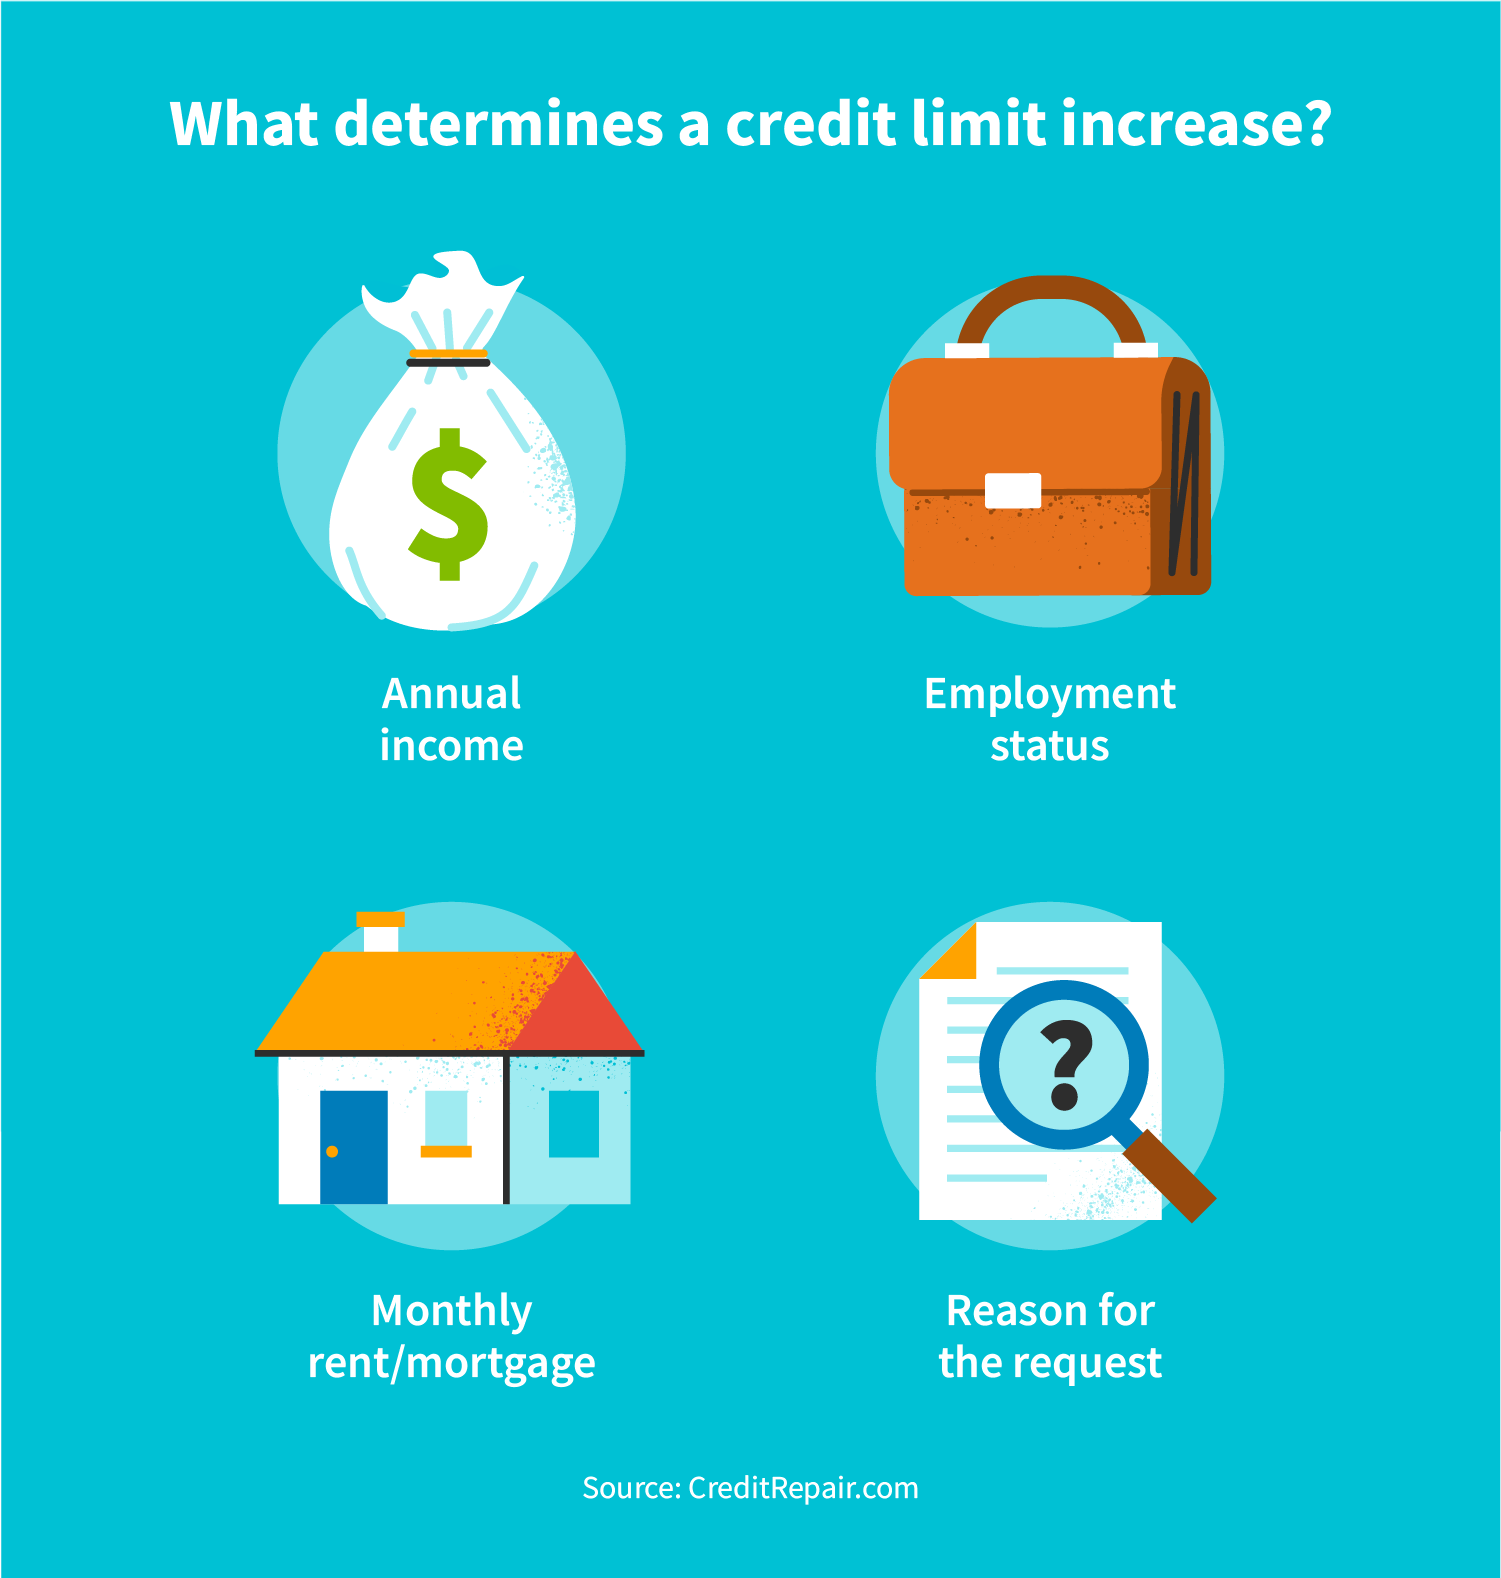 What determines a credit limit increase